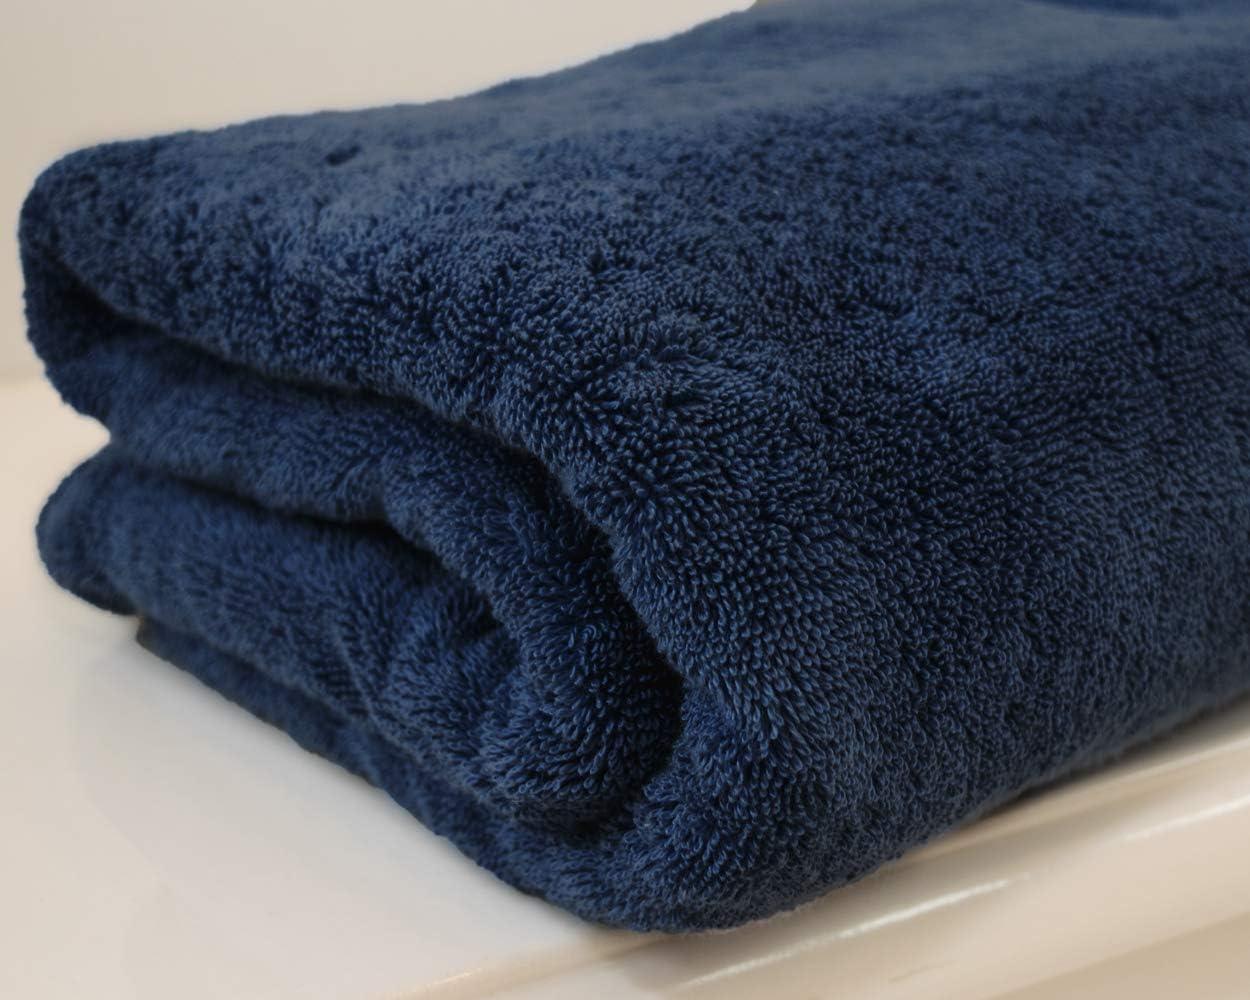 ECOEXISTENCE NAVY BLUE SOLID FLUFFY COTTON BATH,HAND TOWEL OR 4 WASHCLOTHS